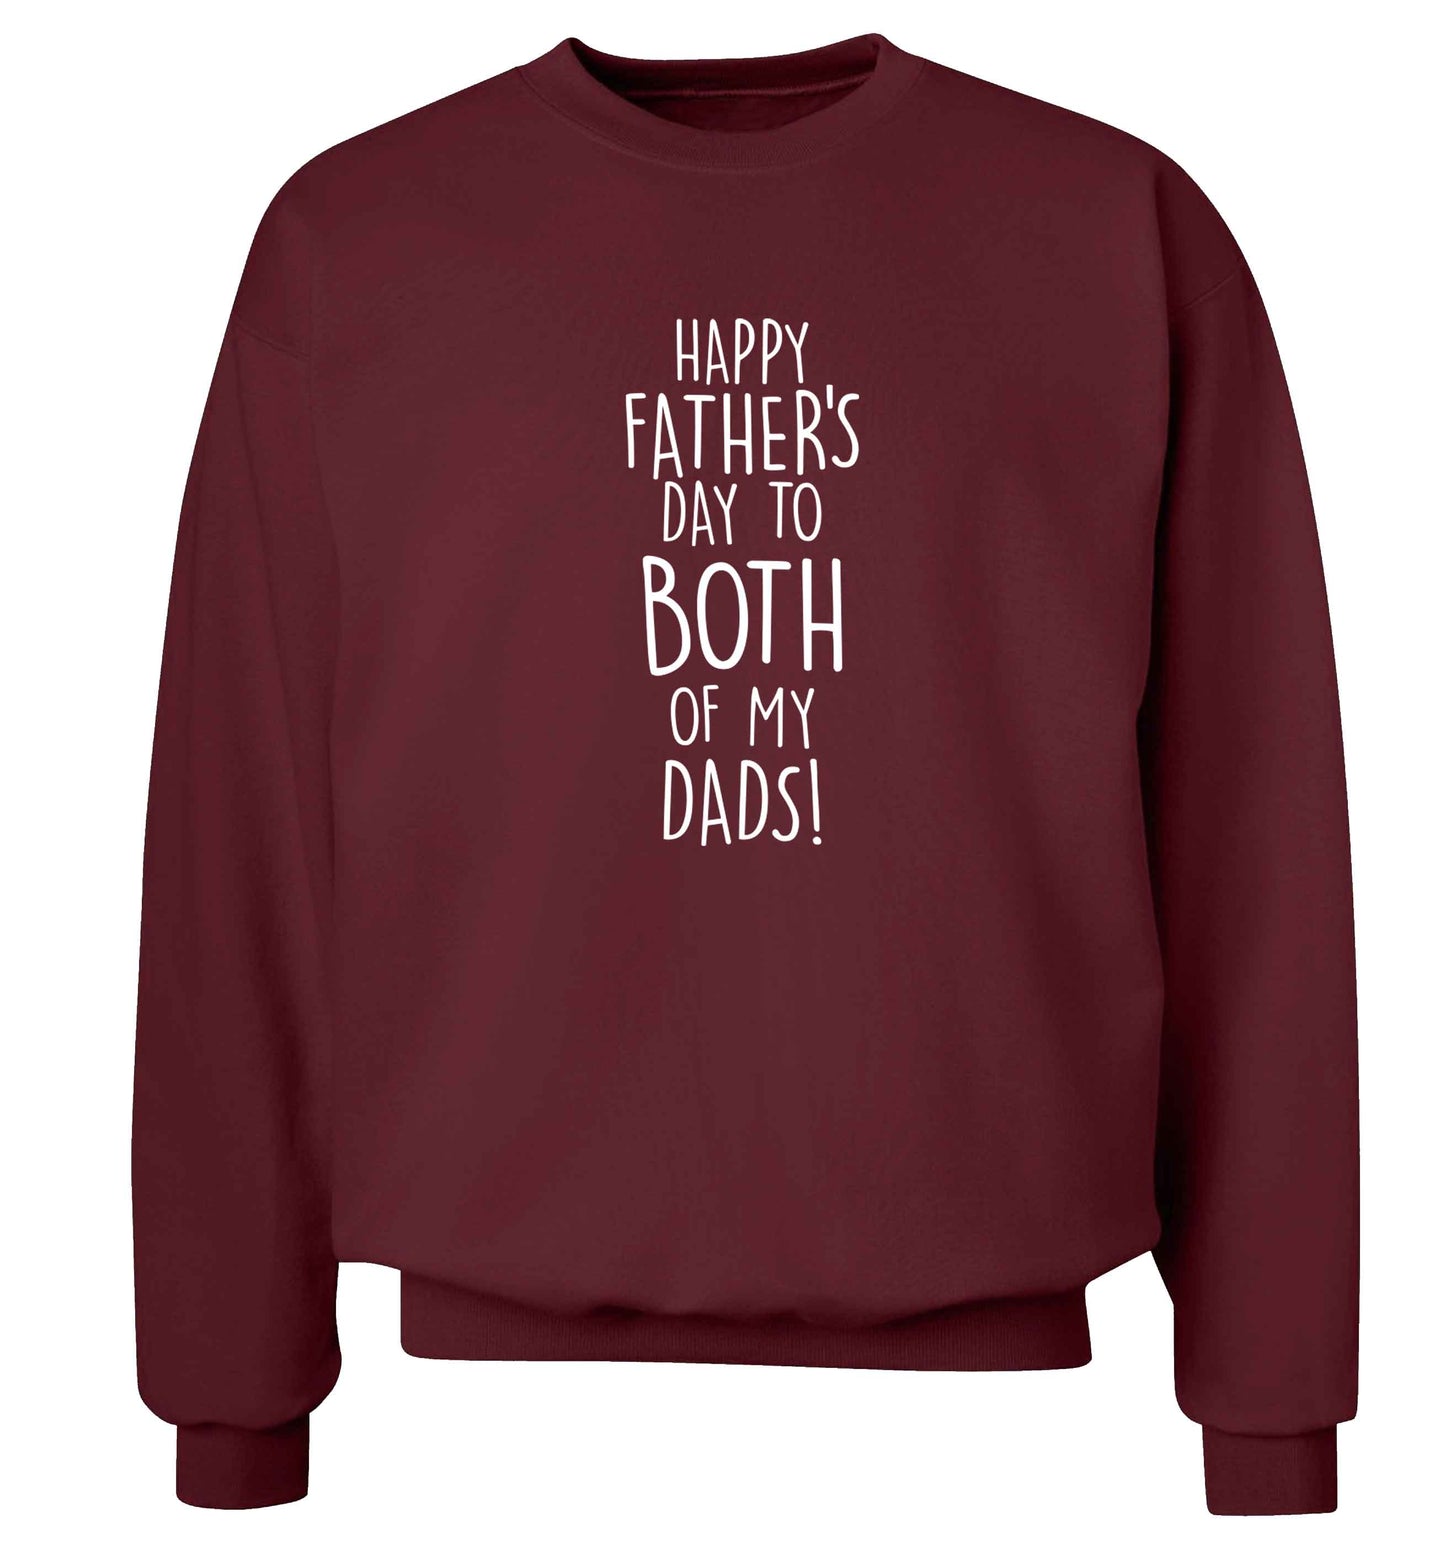 Happy Father's day to both of my dads adult's unisex maroon sweater 2XL